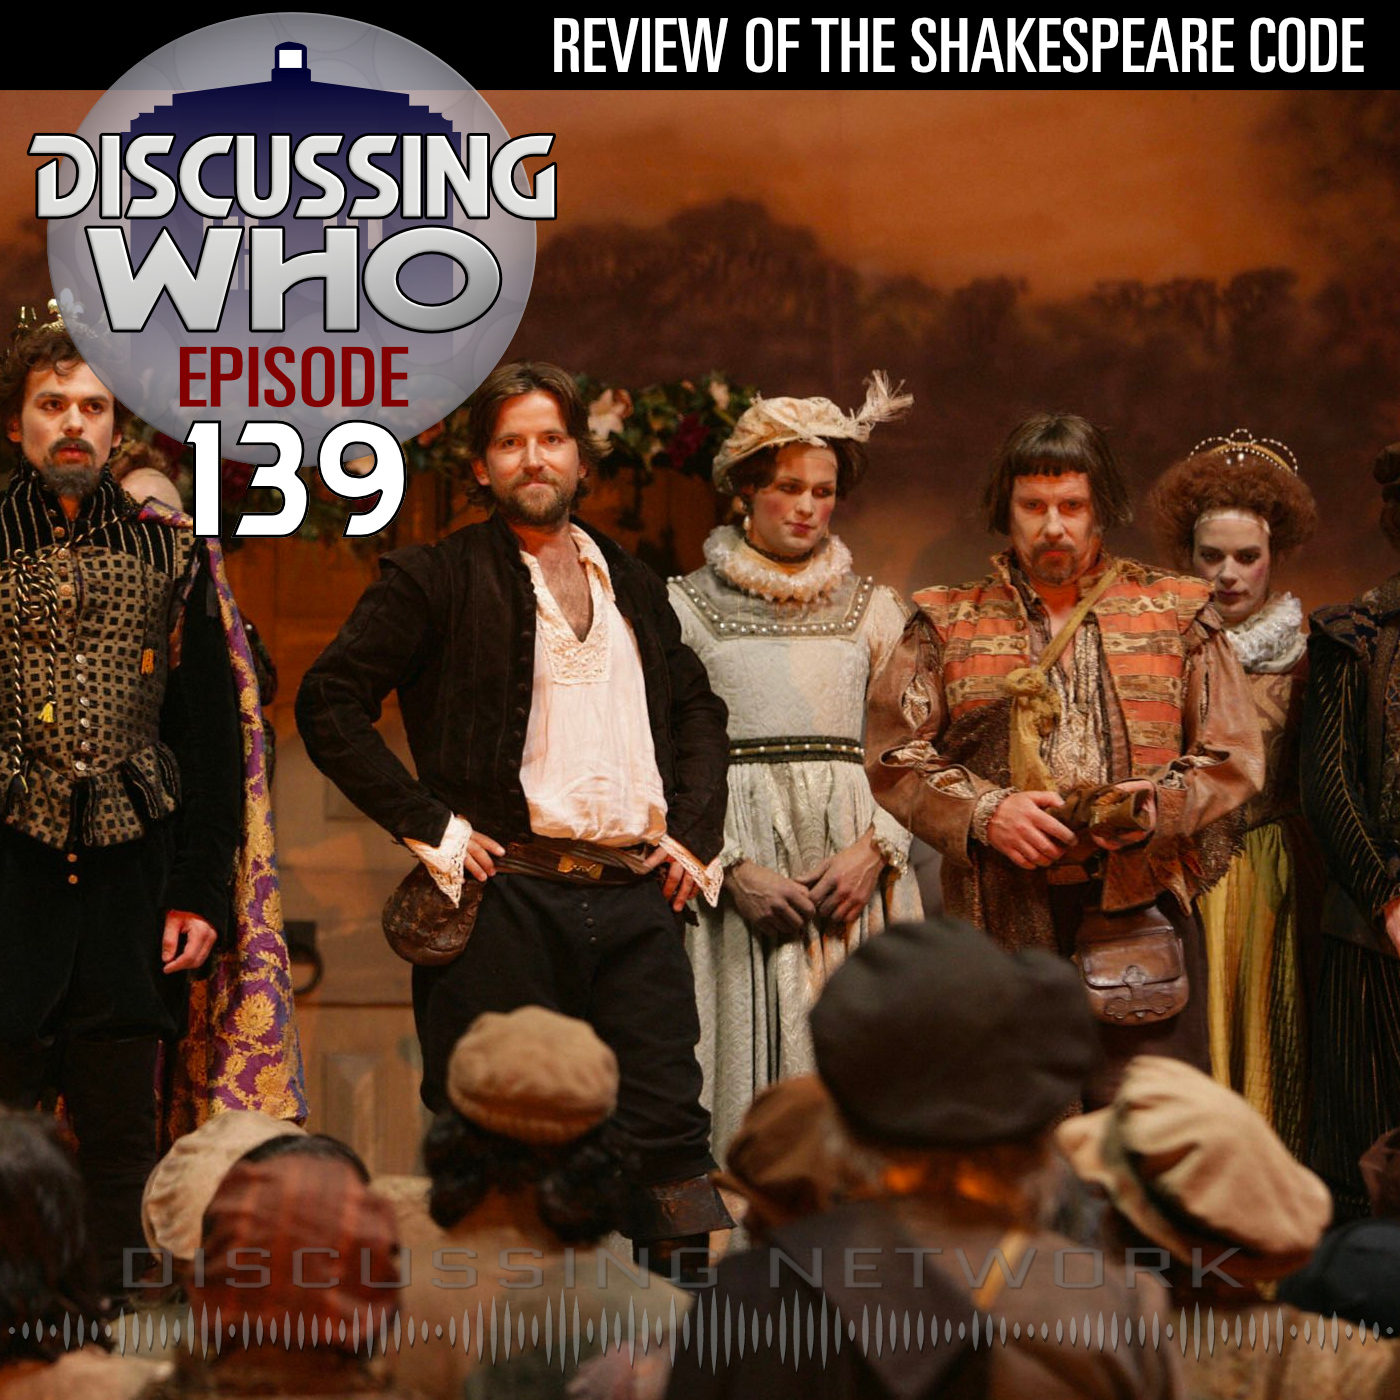 Review of the Shakespeare Code